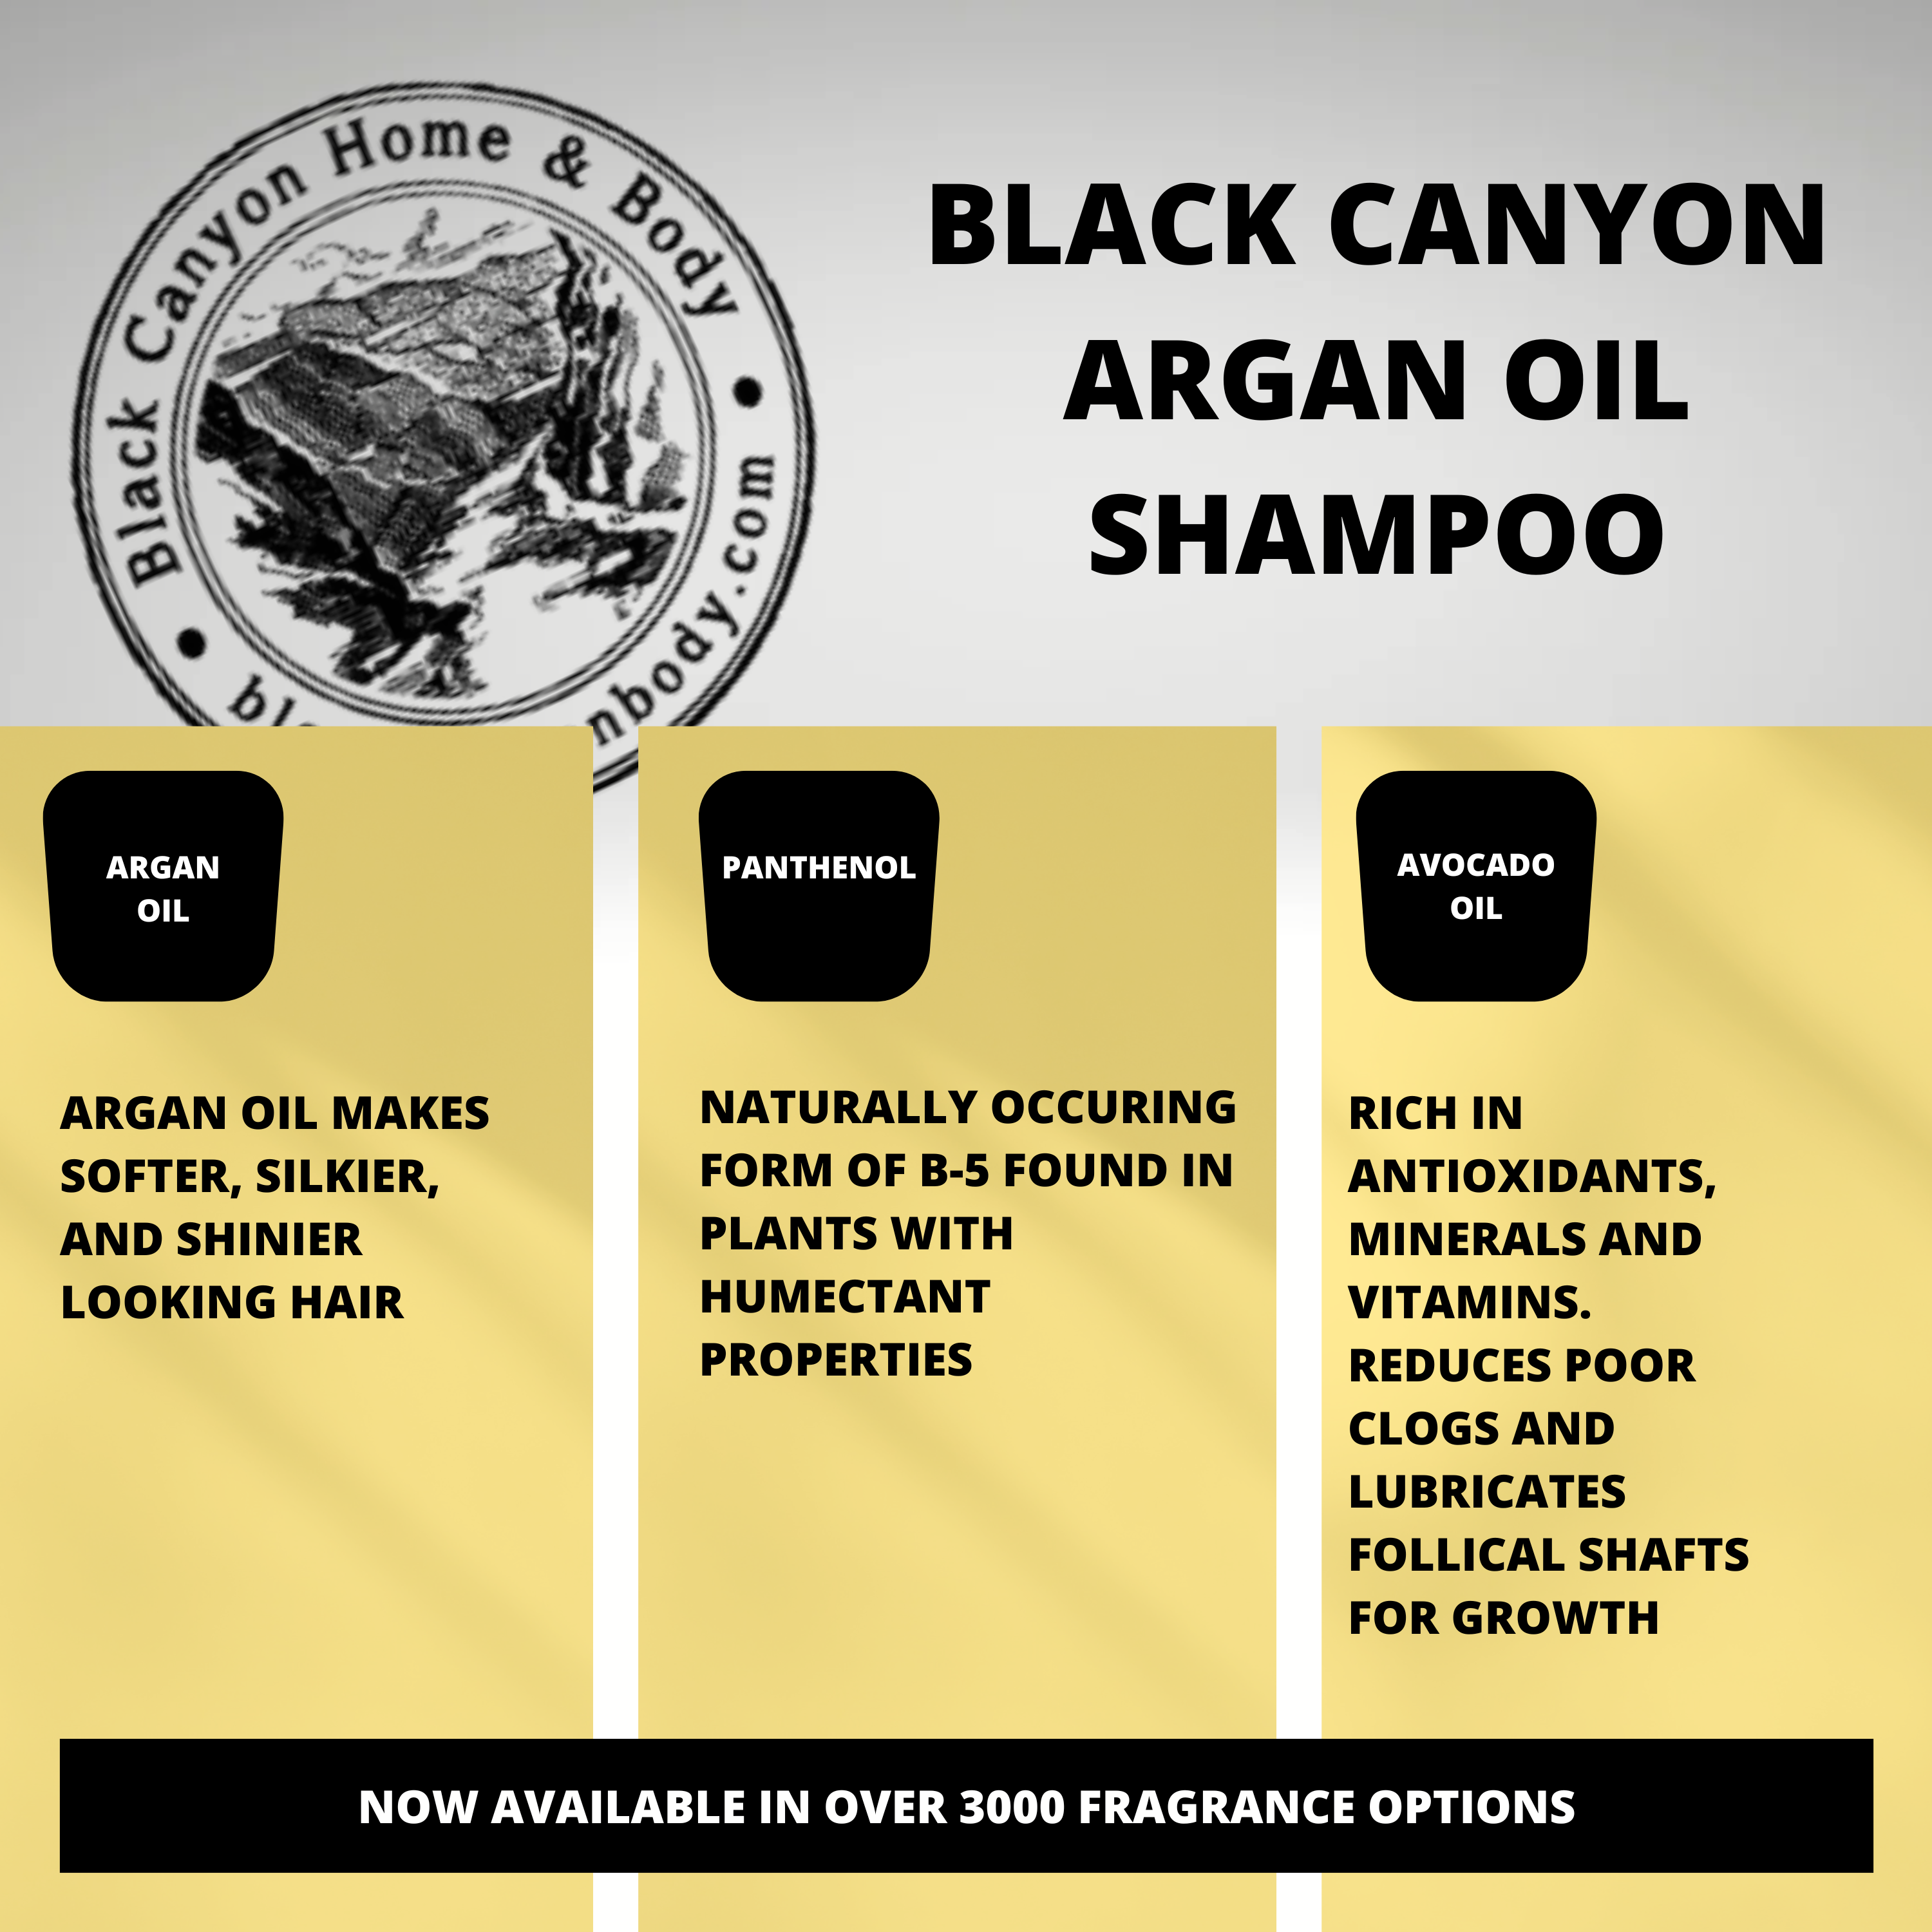 Black Canyon Sweet Pea & Ivy Scented Shampoo with Argan Oil